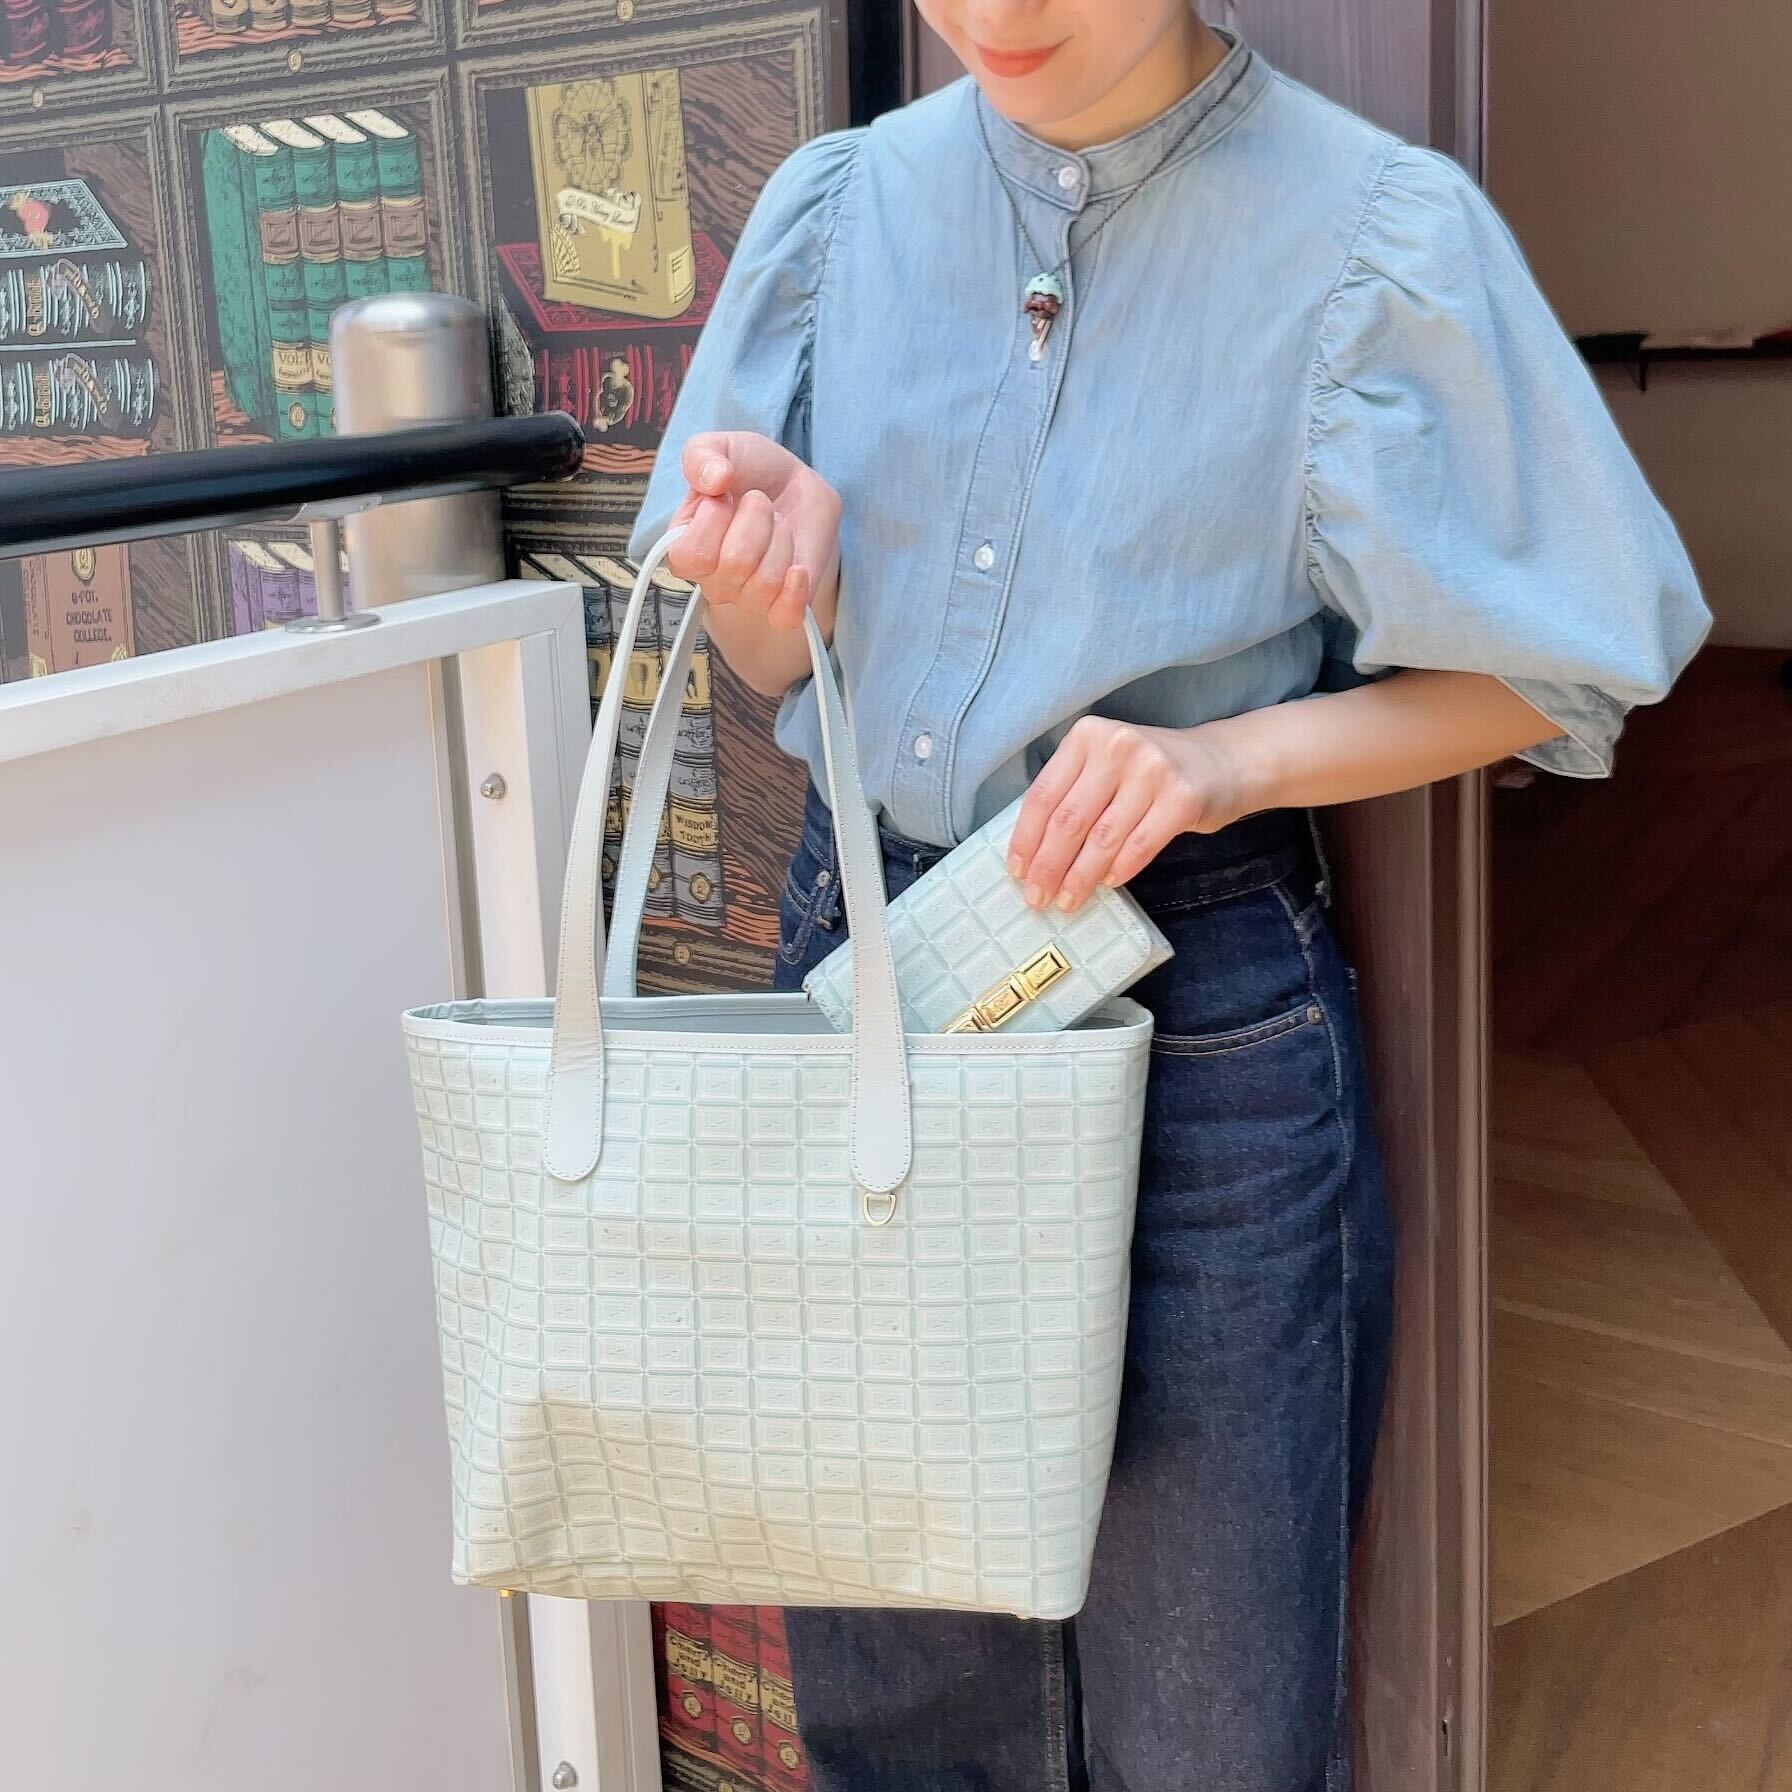 Mint Chocolate Zip Leather Tote Bag【Japan Jewelry】